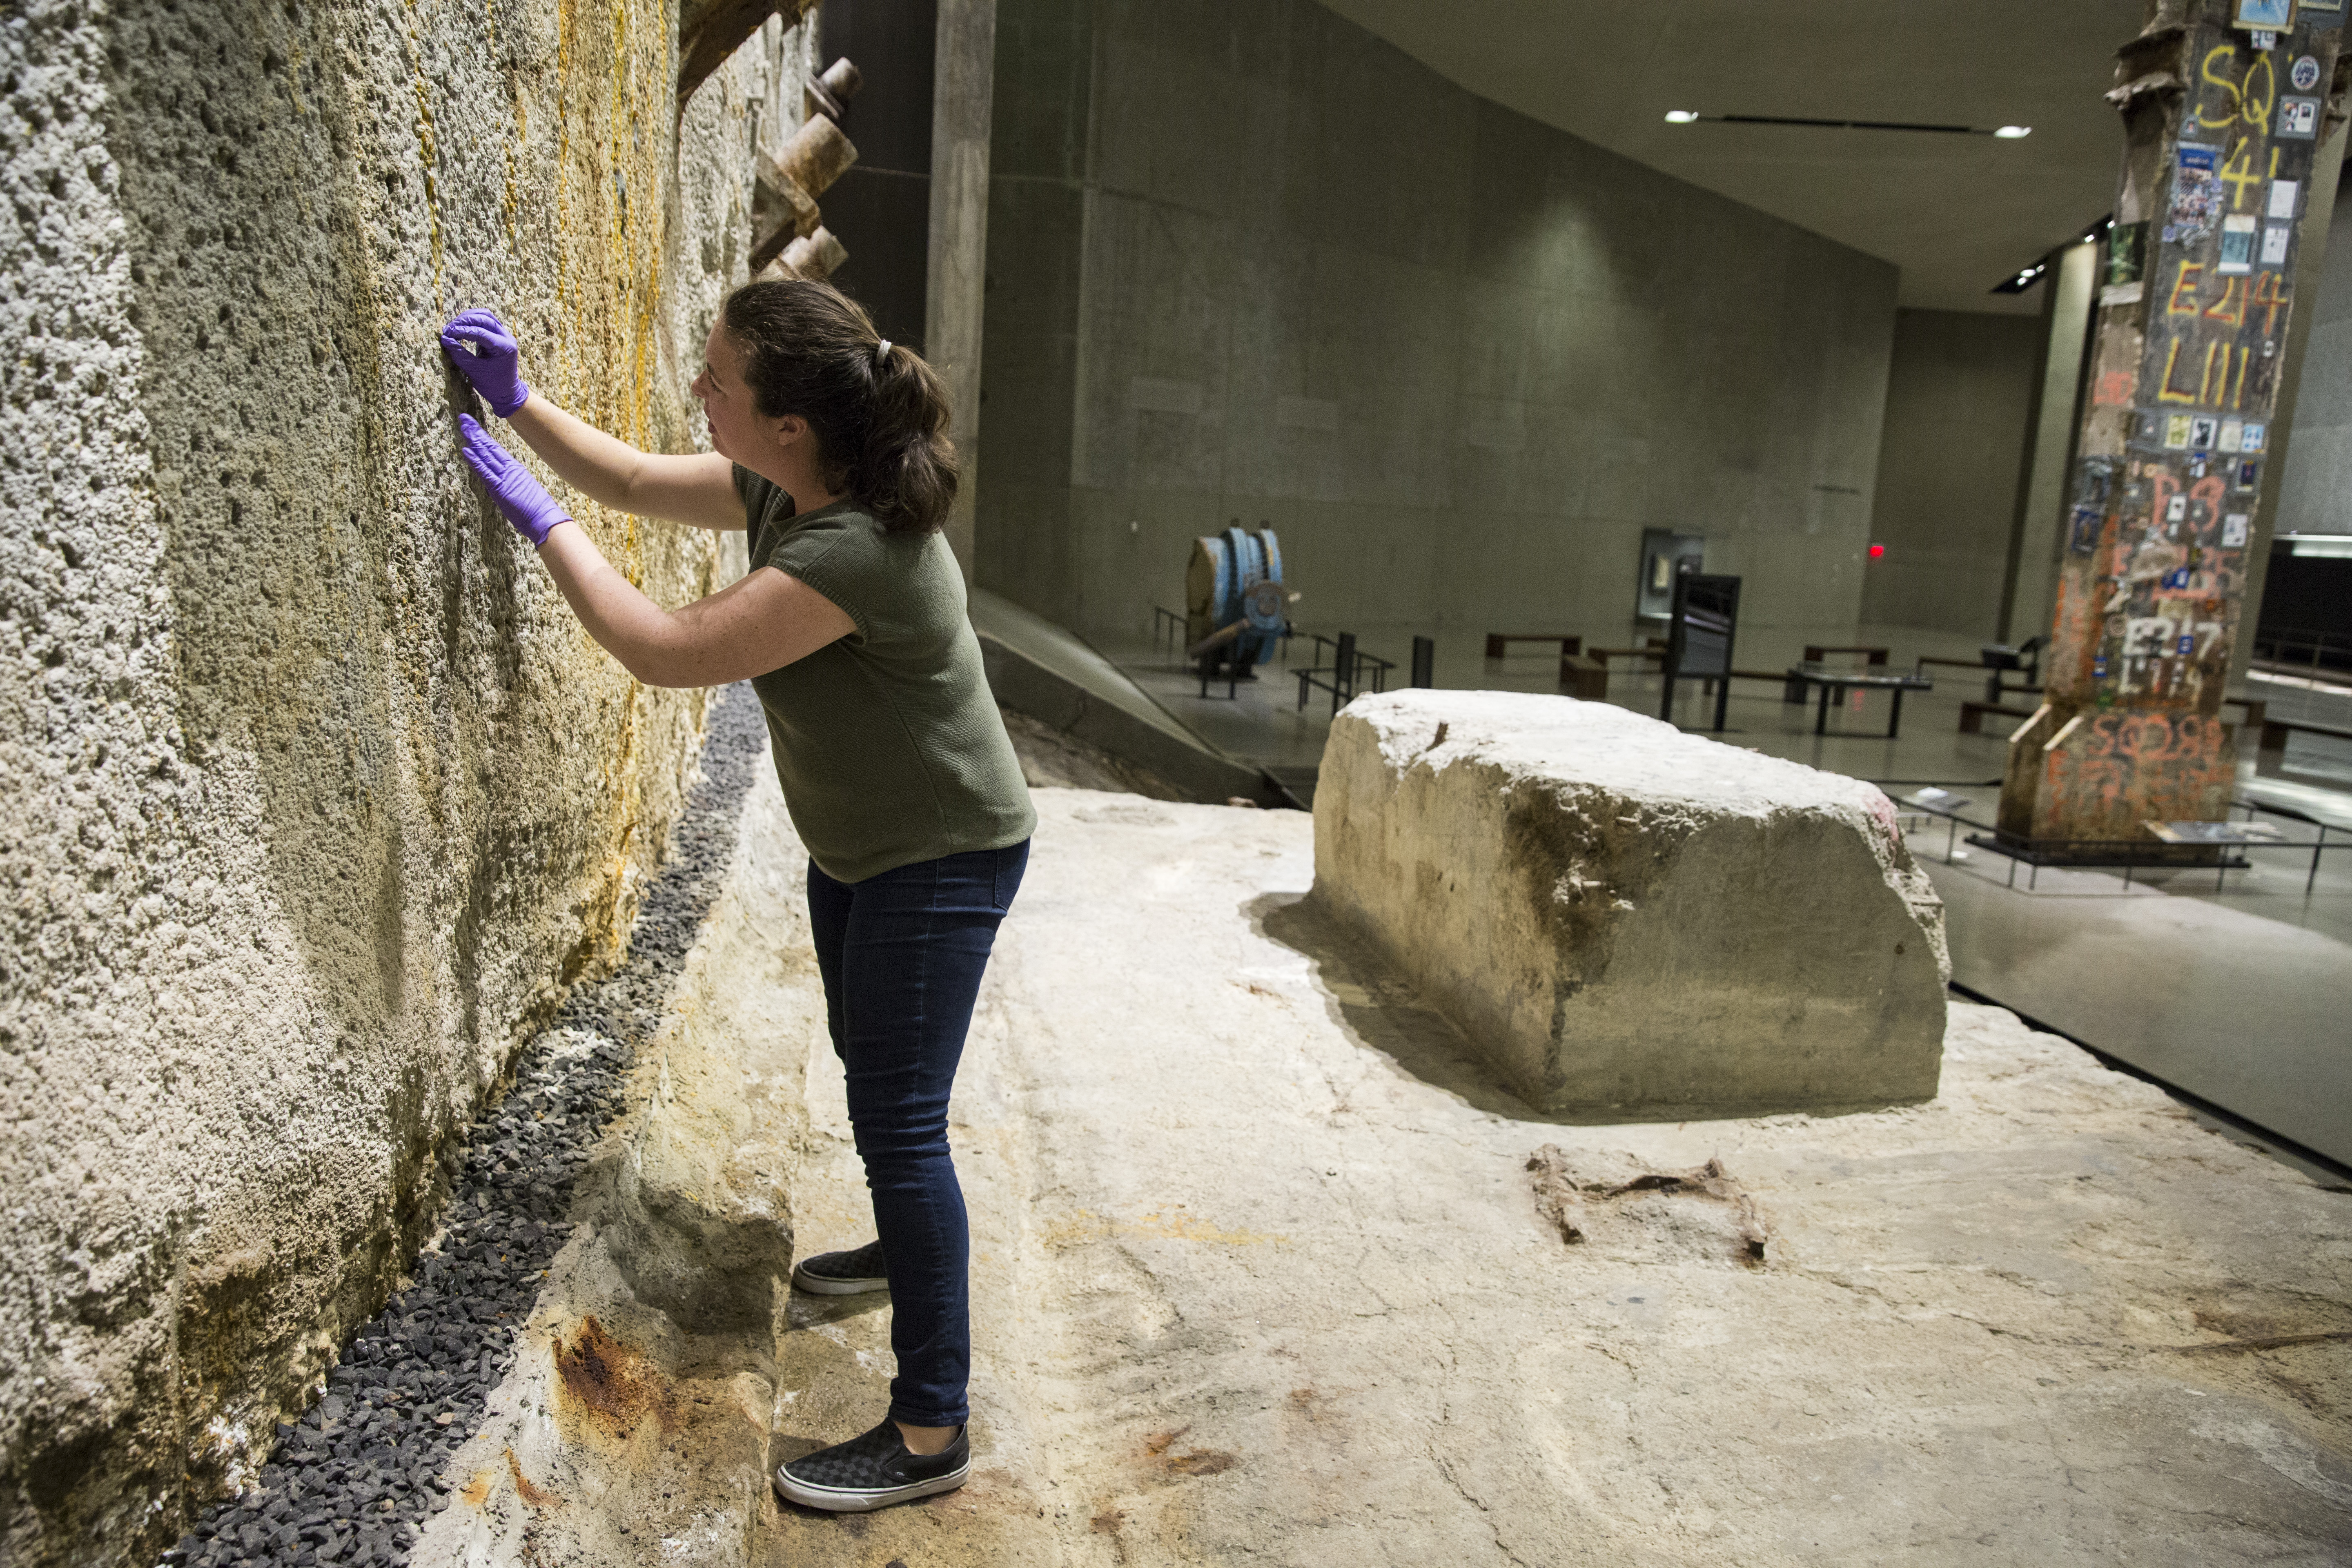 A woman wears purple gloves as she does work conserving the slurry wall at Foundation Hall in the Museum.